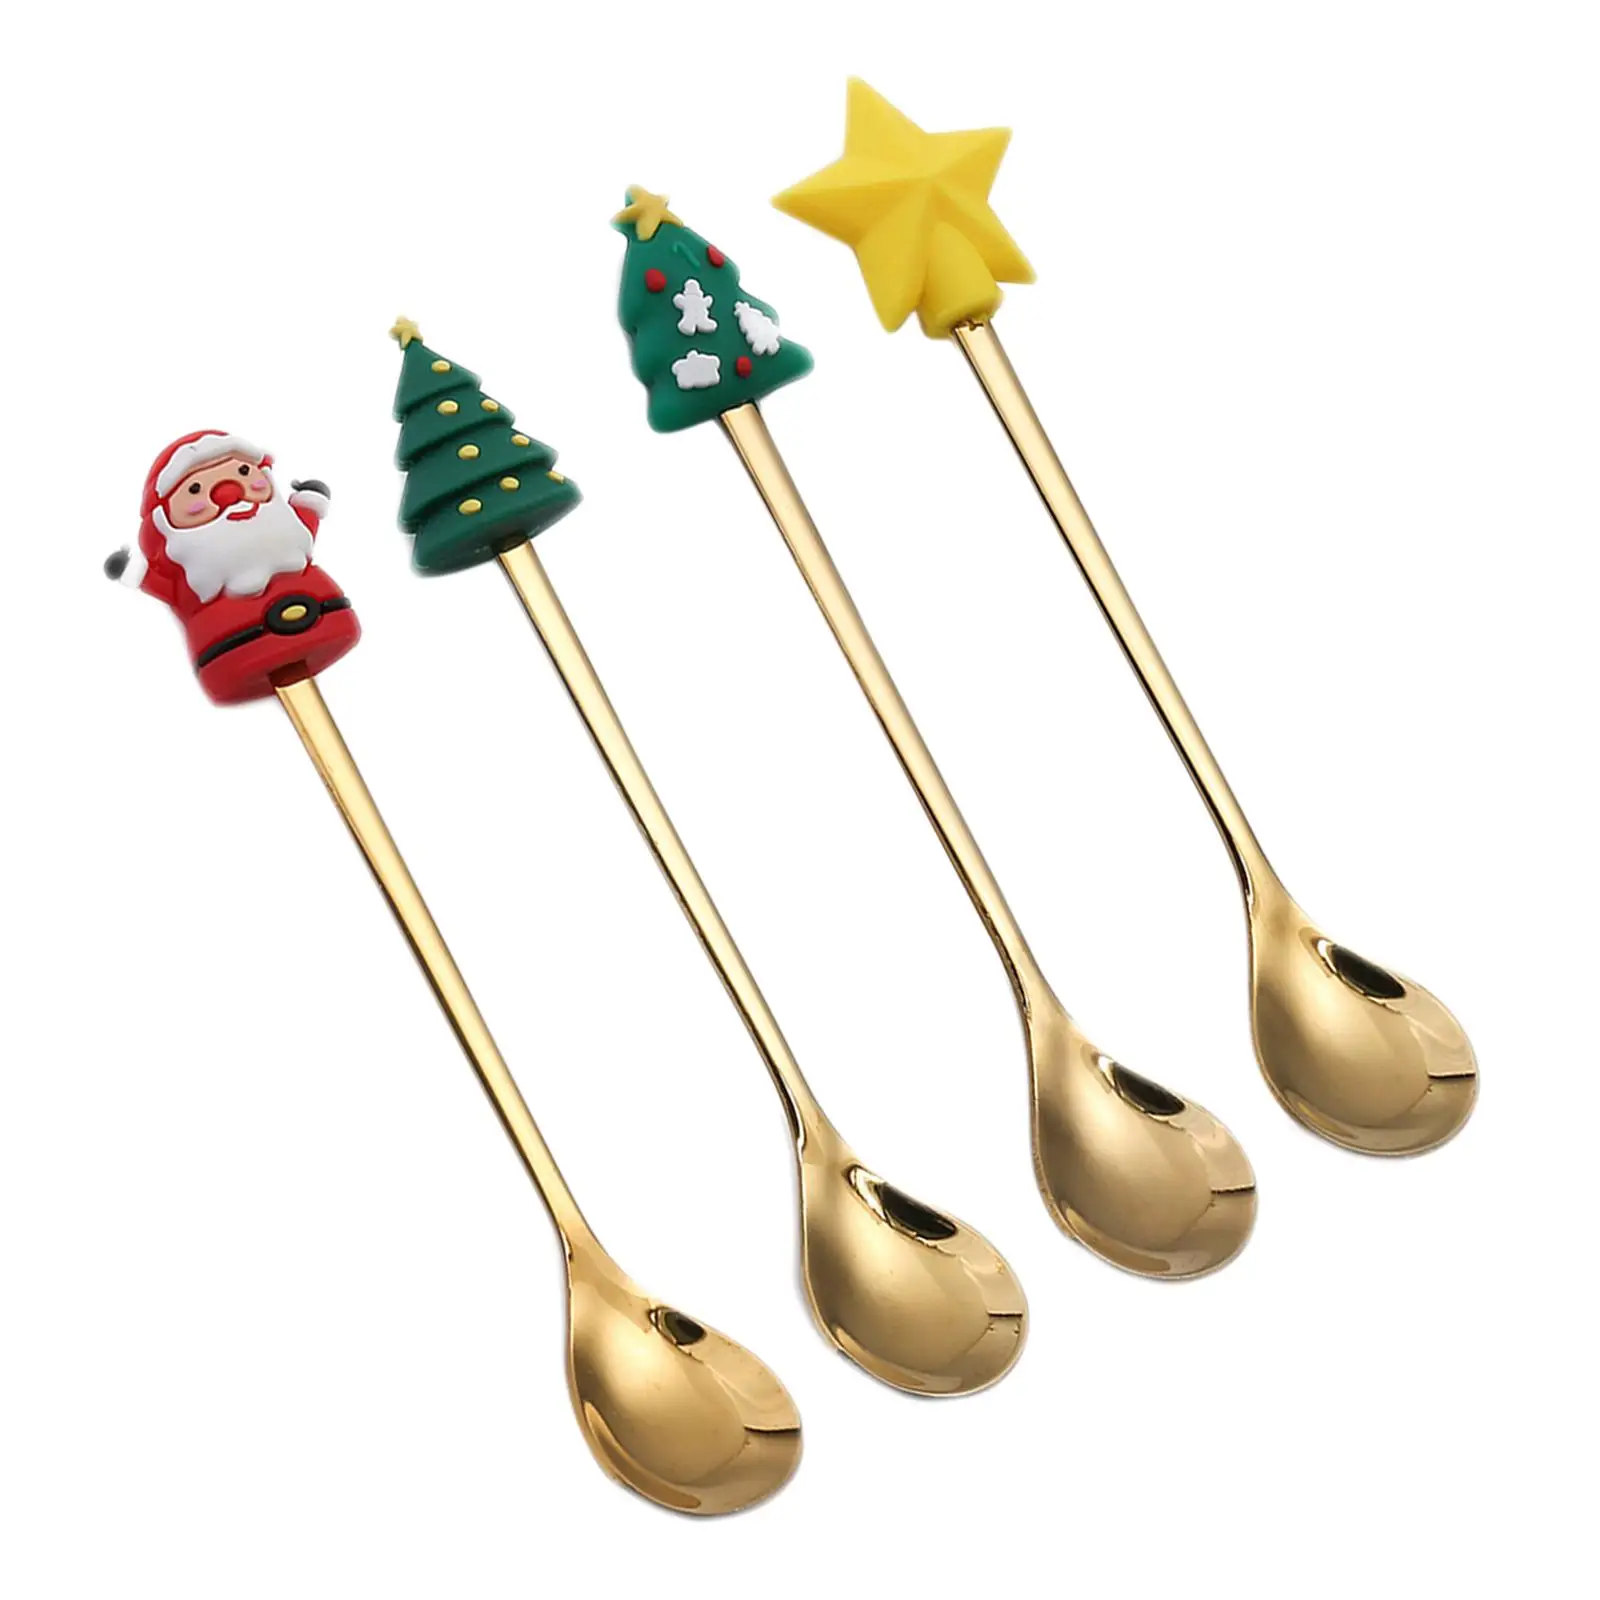 4Pcs Christmas Table Decorations Soup Dessert Spoon Tea Spoons decor Coffee Stirring Spoon for Daily Use Party Xmas